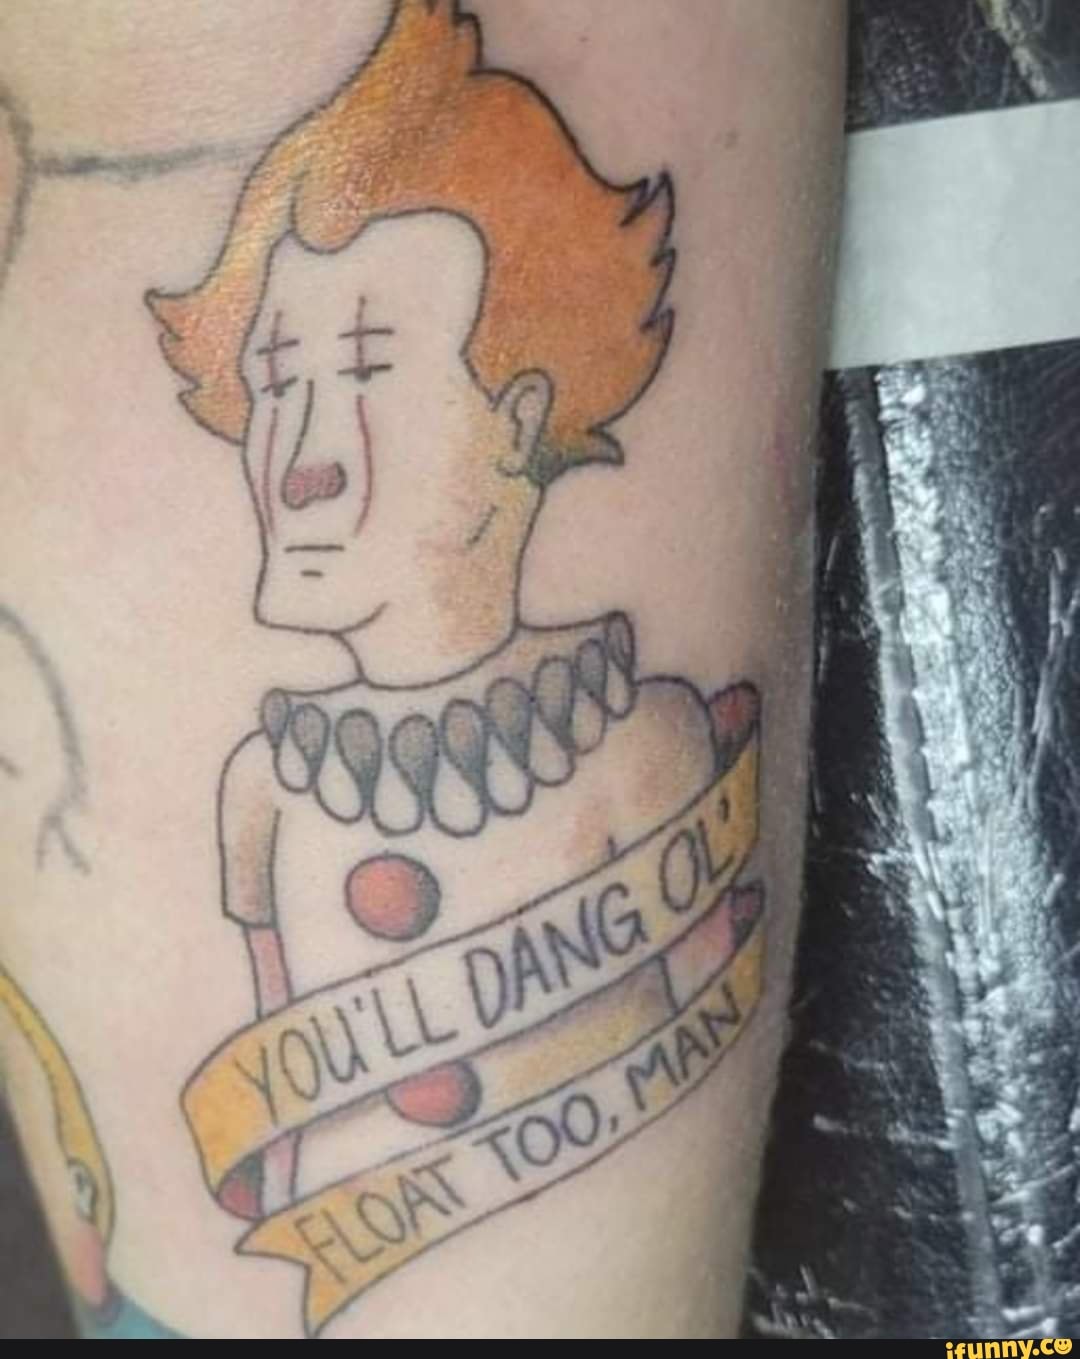 The Best King of the Hill Tattoos  I Tell You Hwat  MiHO